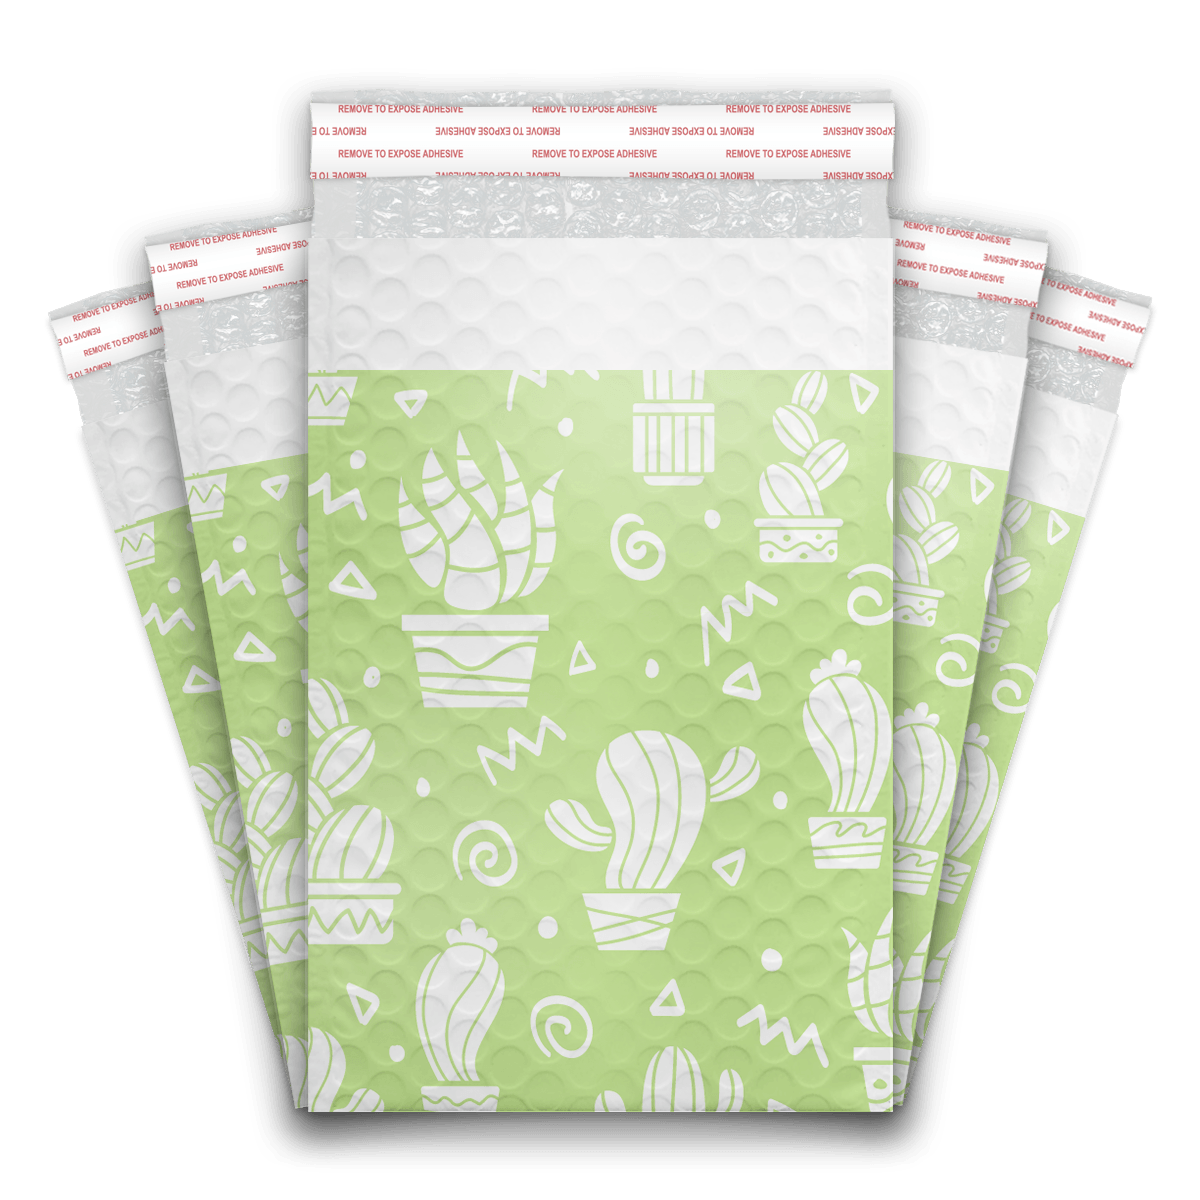 Green Cactus Designer Poly Bubble Mailer Padded Shipping Bags Pro Supply Global